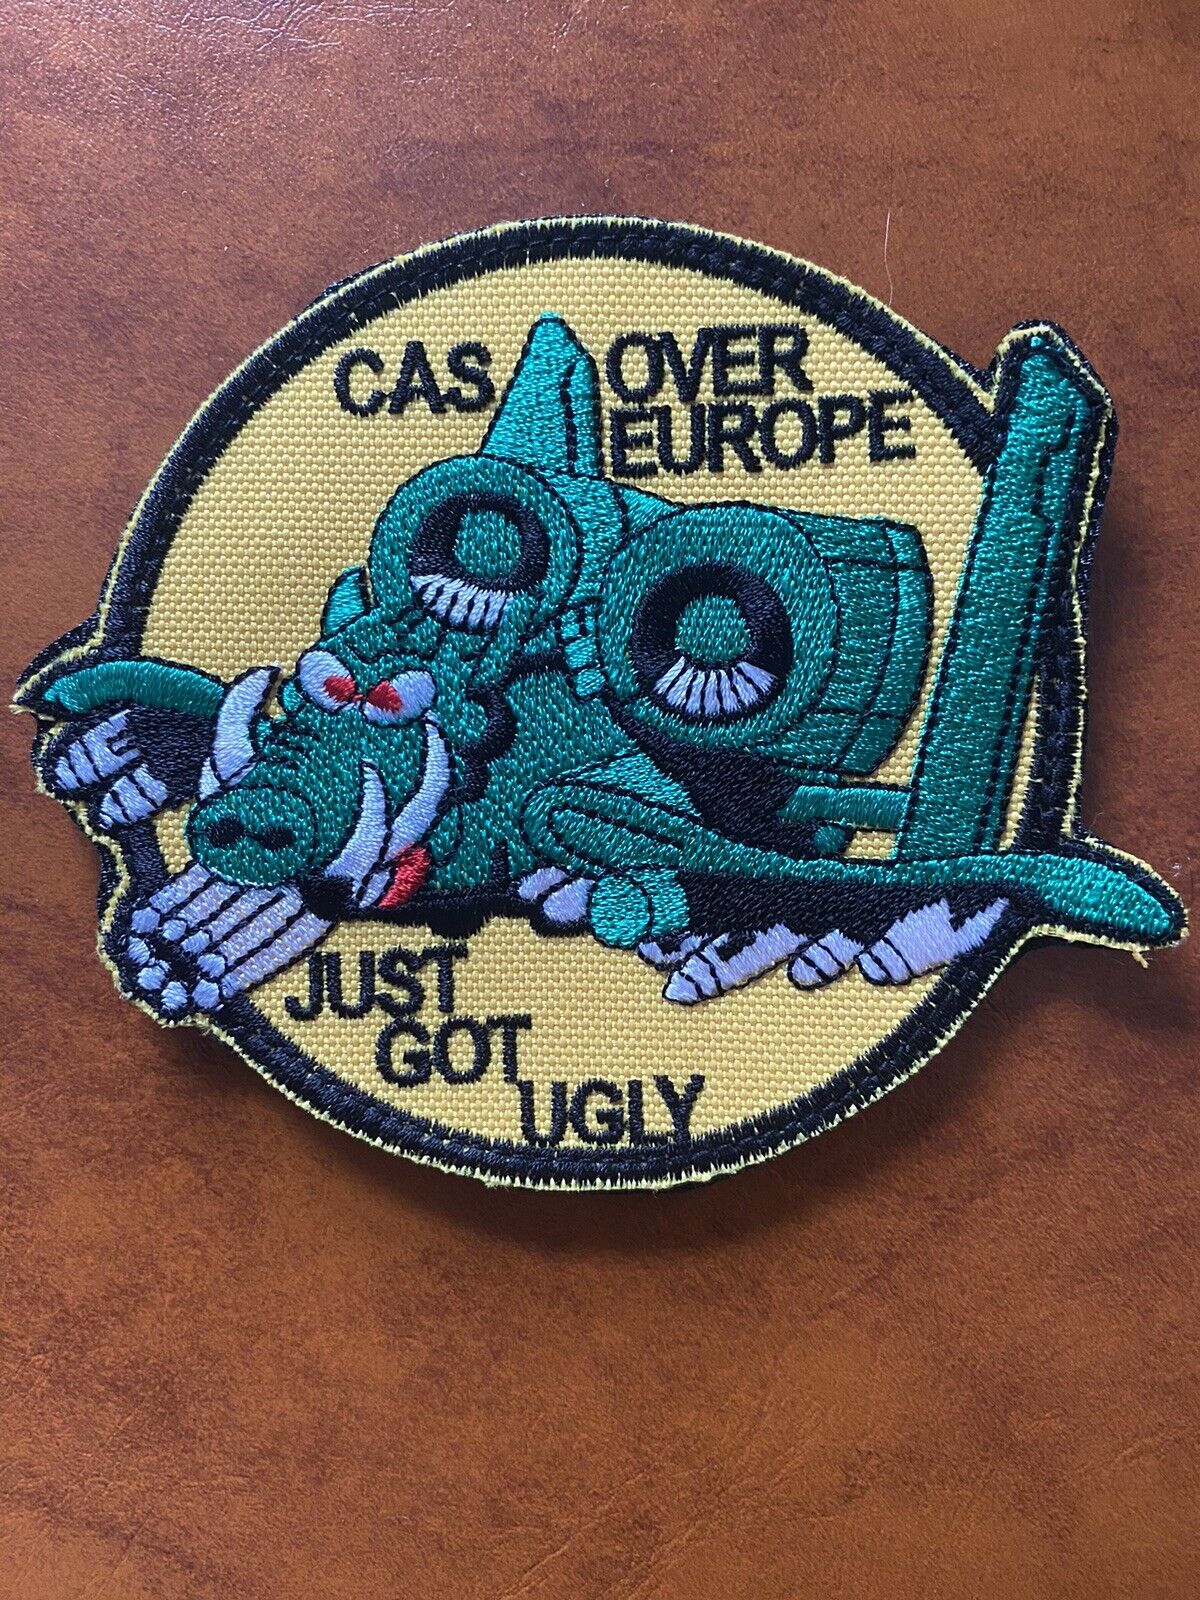 USAF  A-10C Thunderbolt II Patch CAS over Europe Just Got Ugly